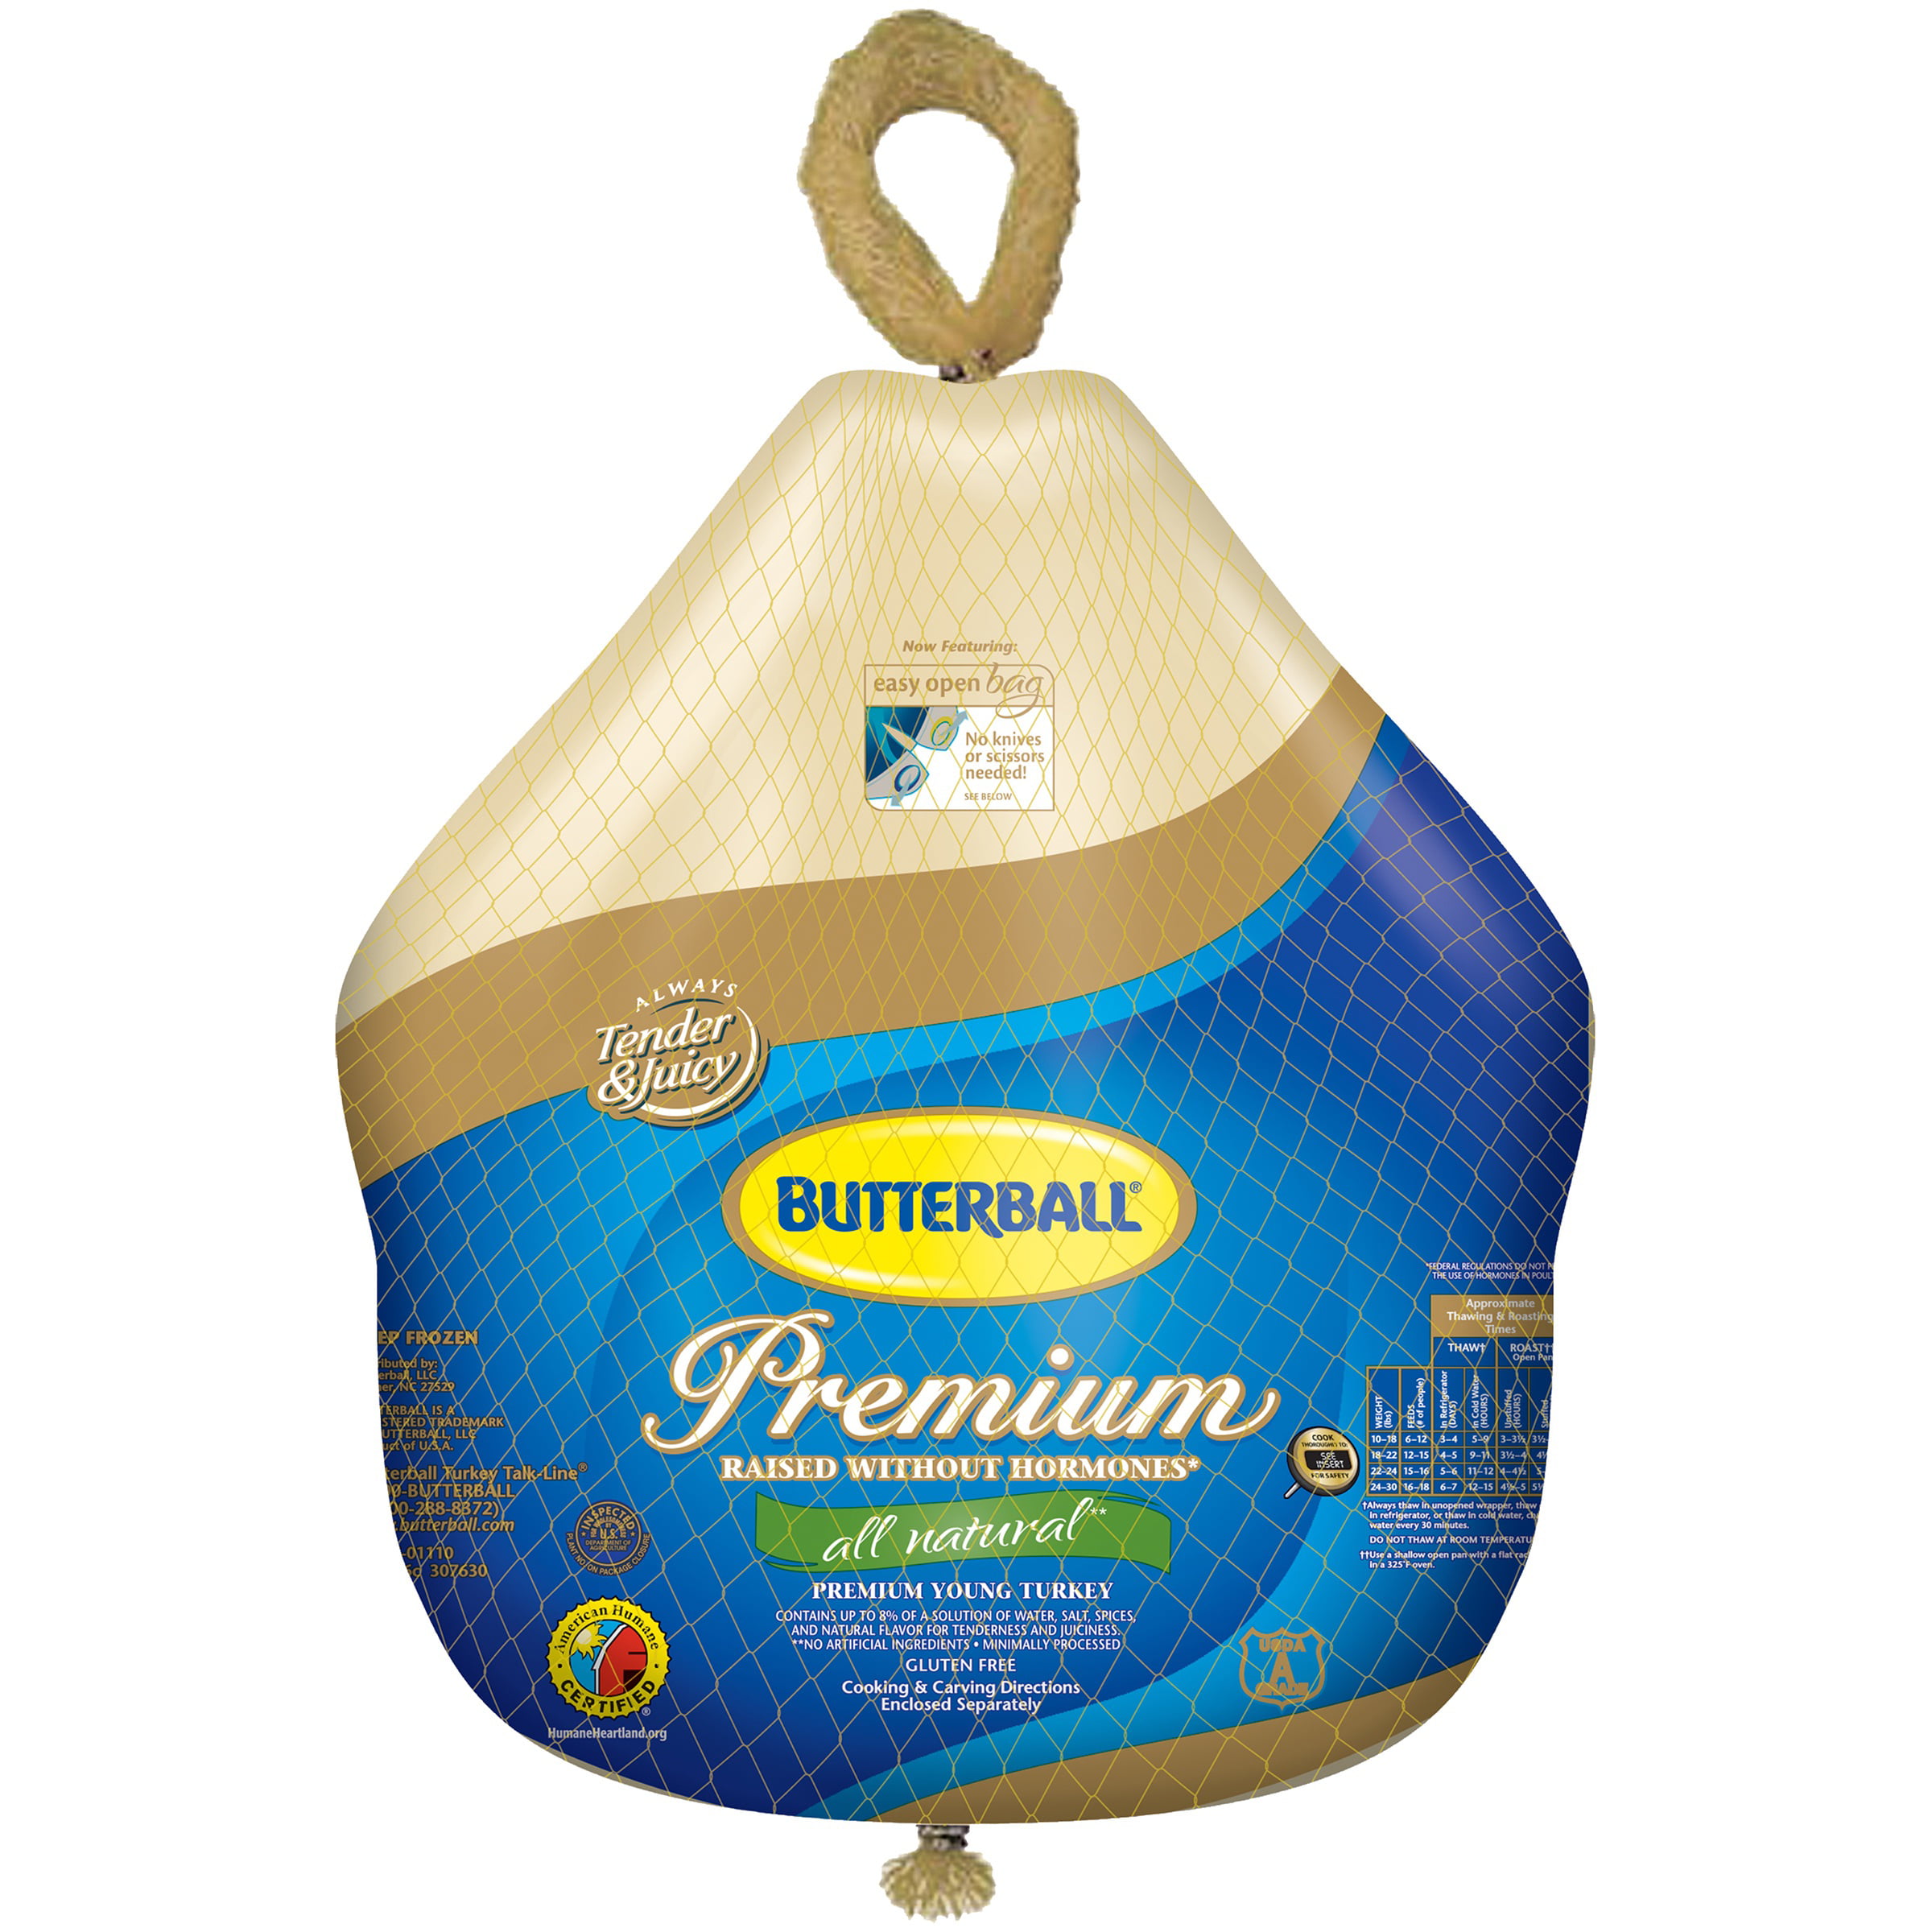 Butterball ® Premium Young Turkey.